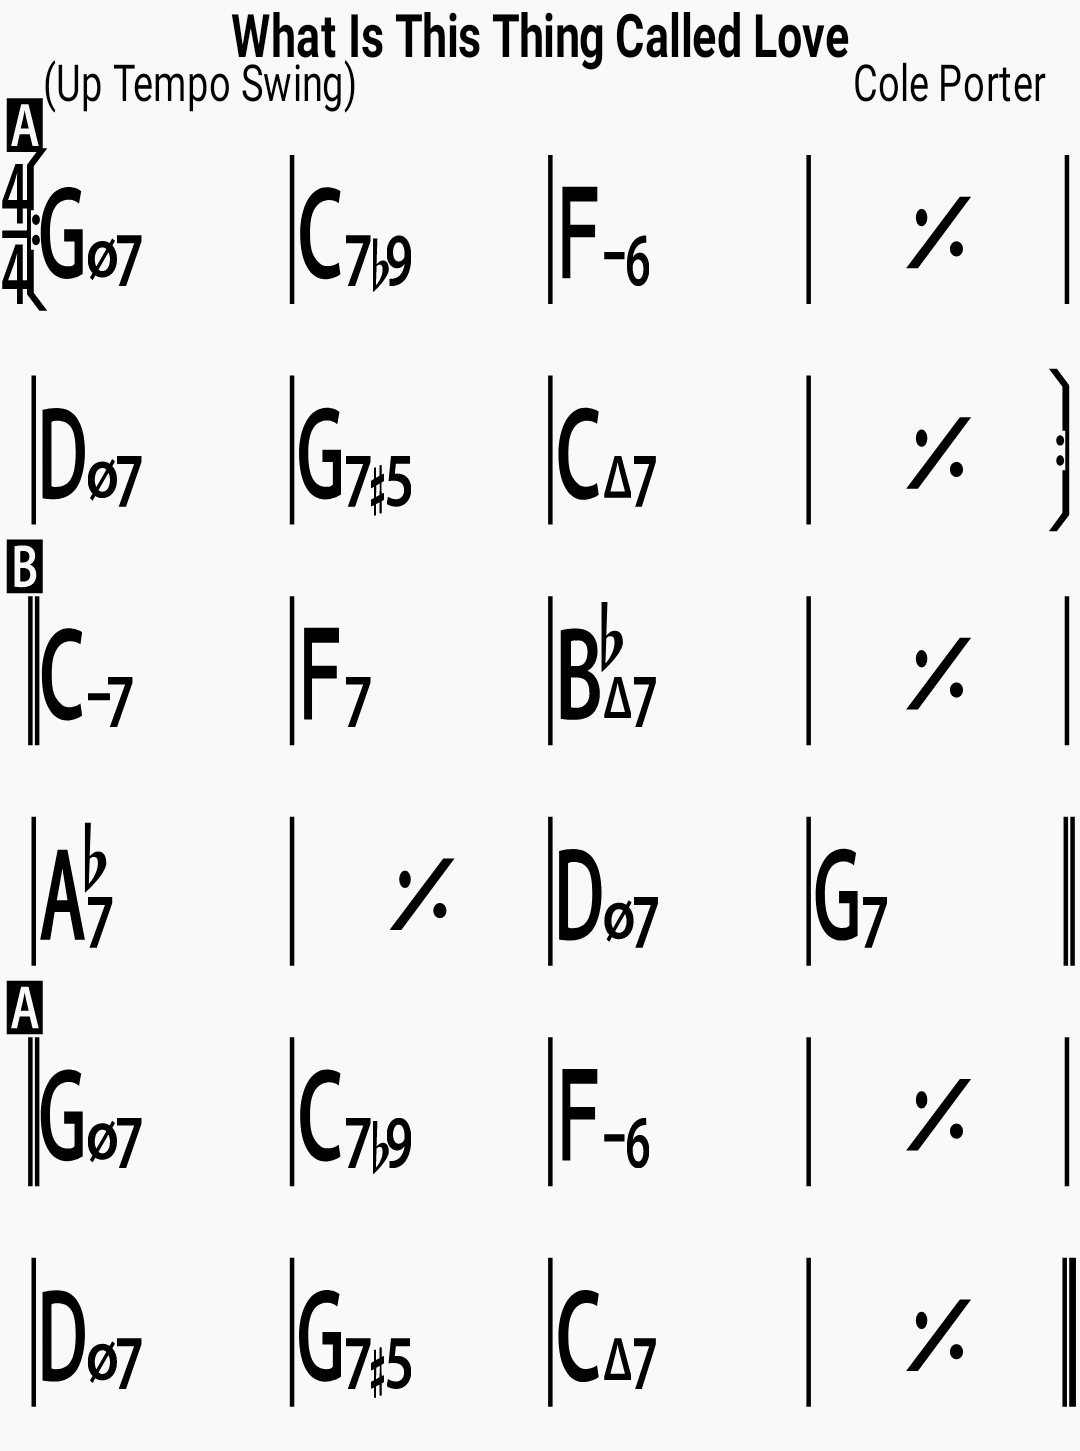 Chord chart for the jazz standard What Is This Thing Called Love?